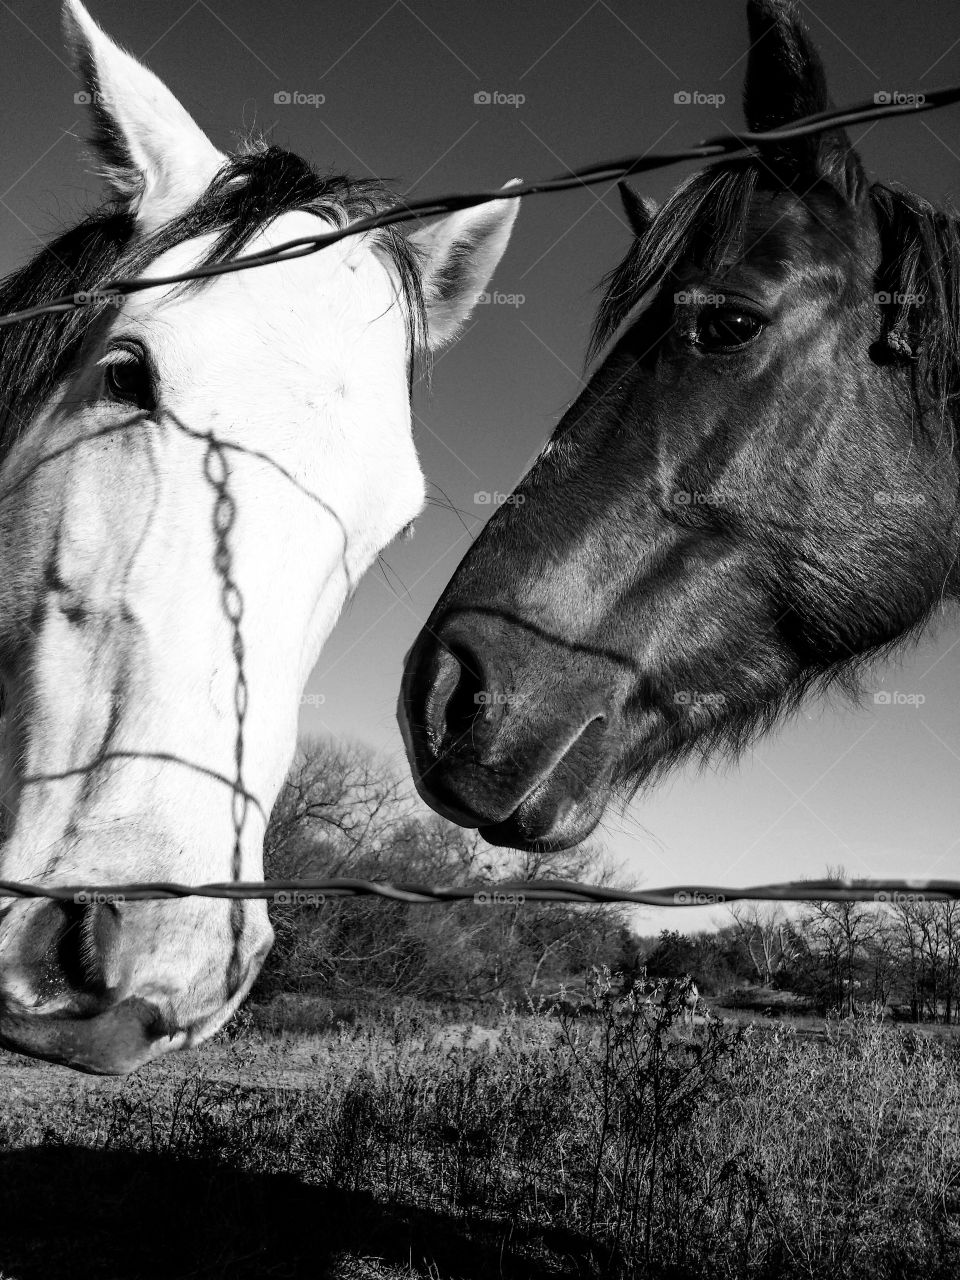 Horses in Black and White